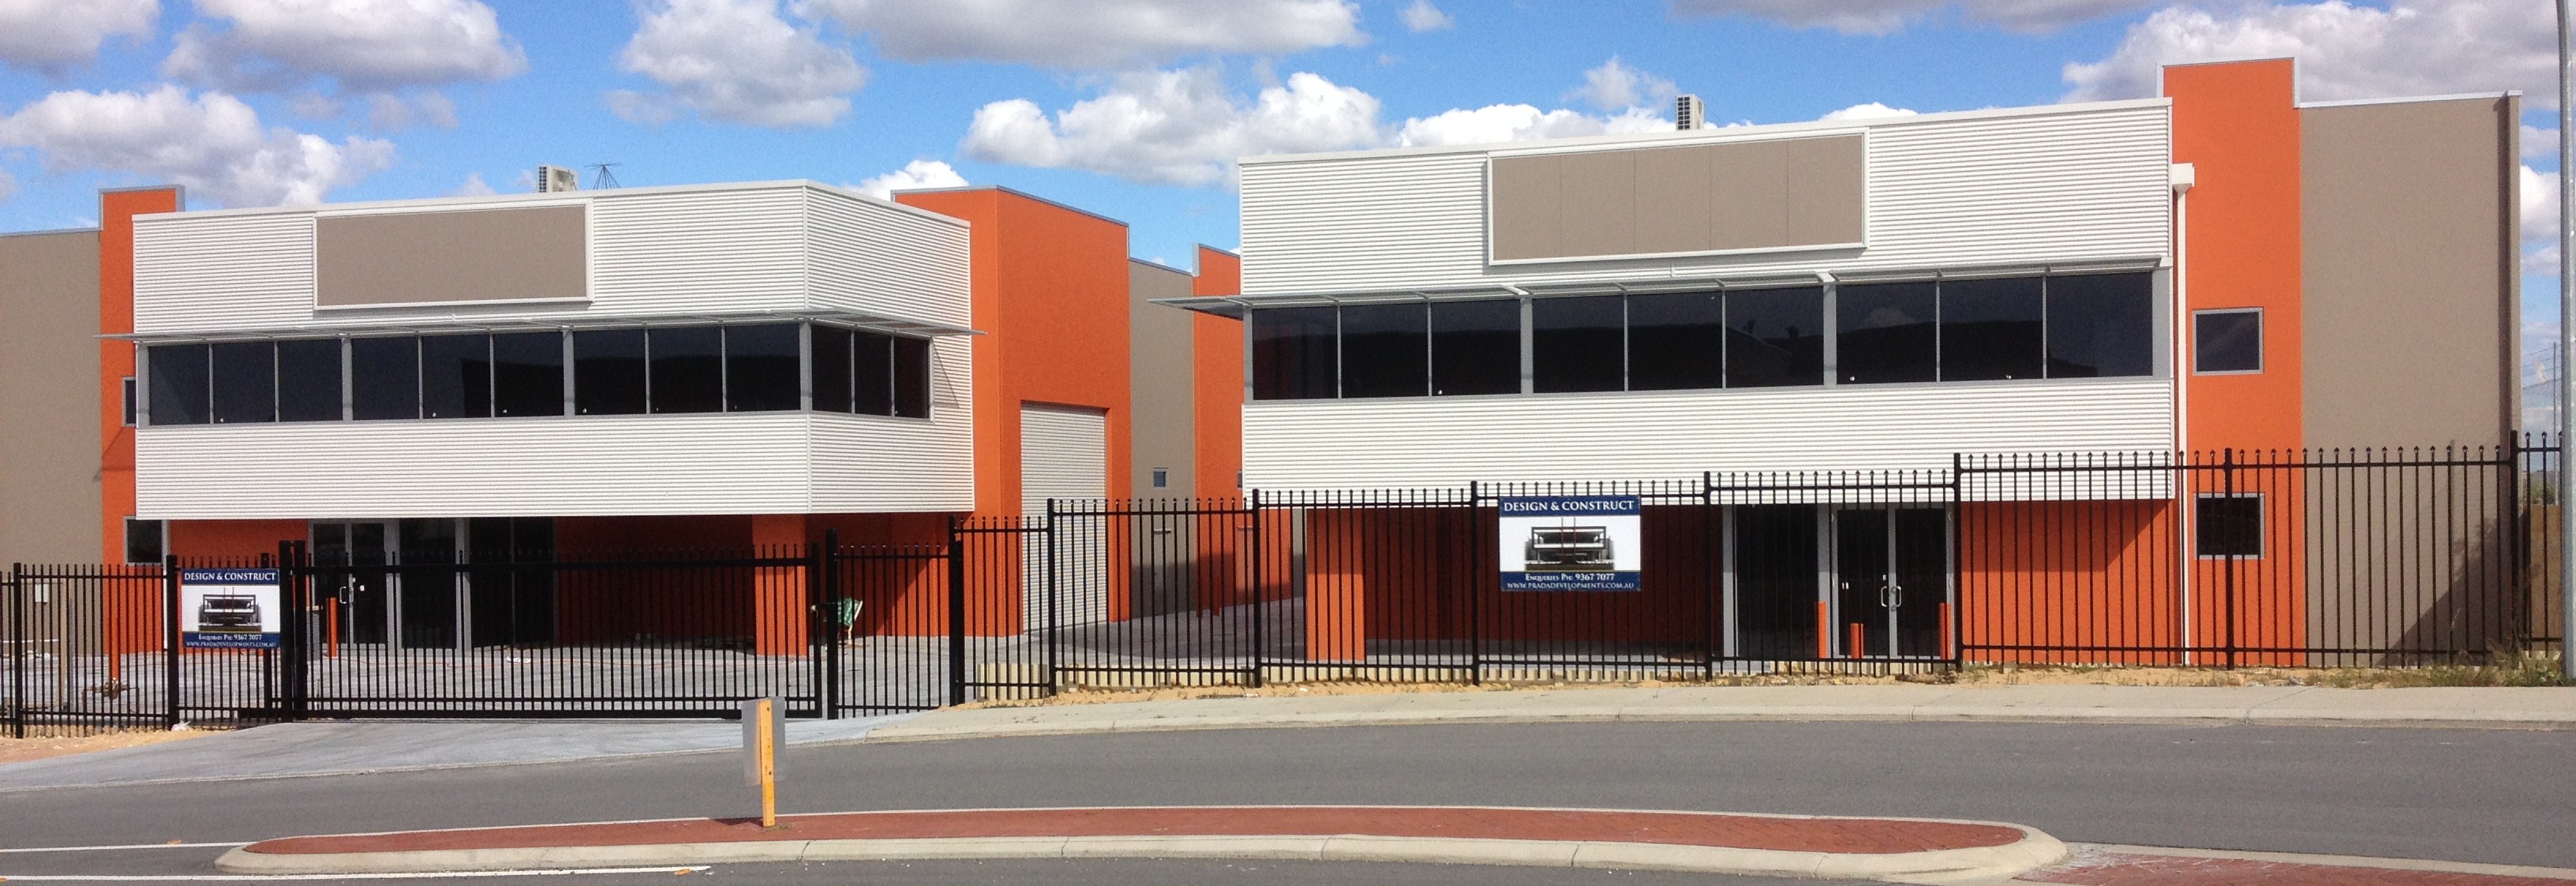 Exterior shot of twin warehouse office units, finished in white and orange paint